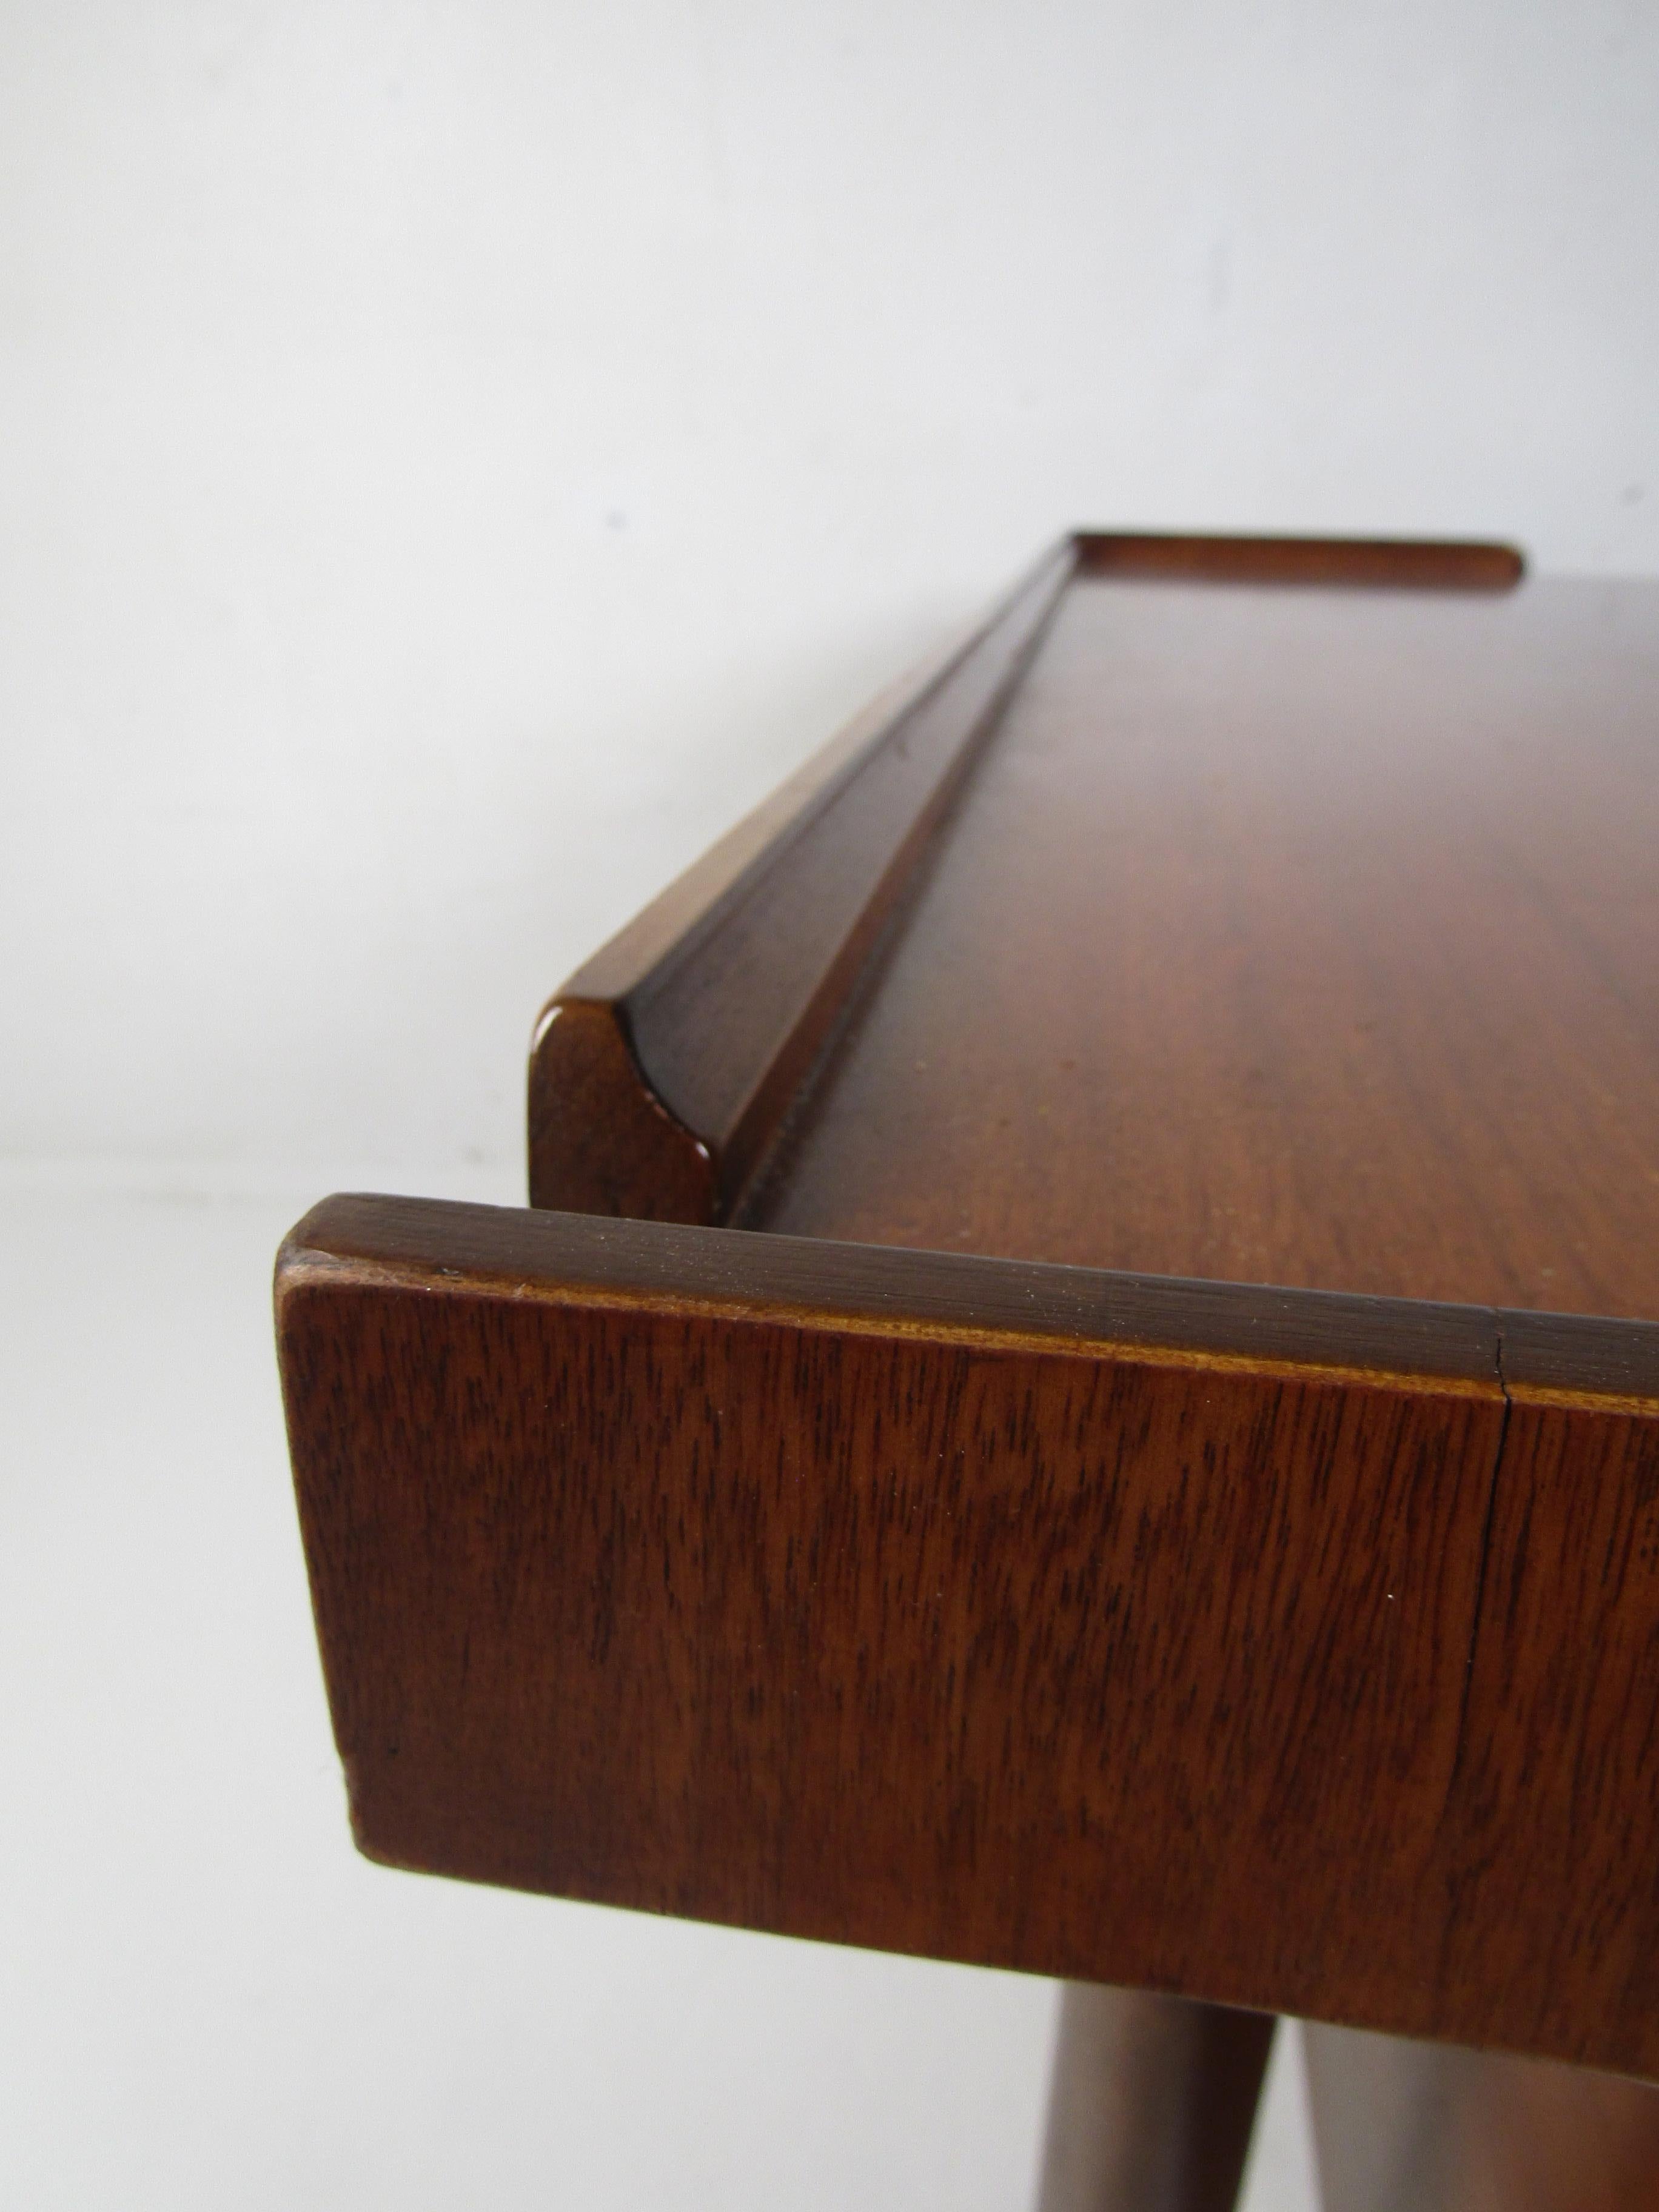 Walnut Midcentury Desk and Chair by Hooker Furniture